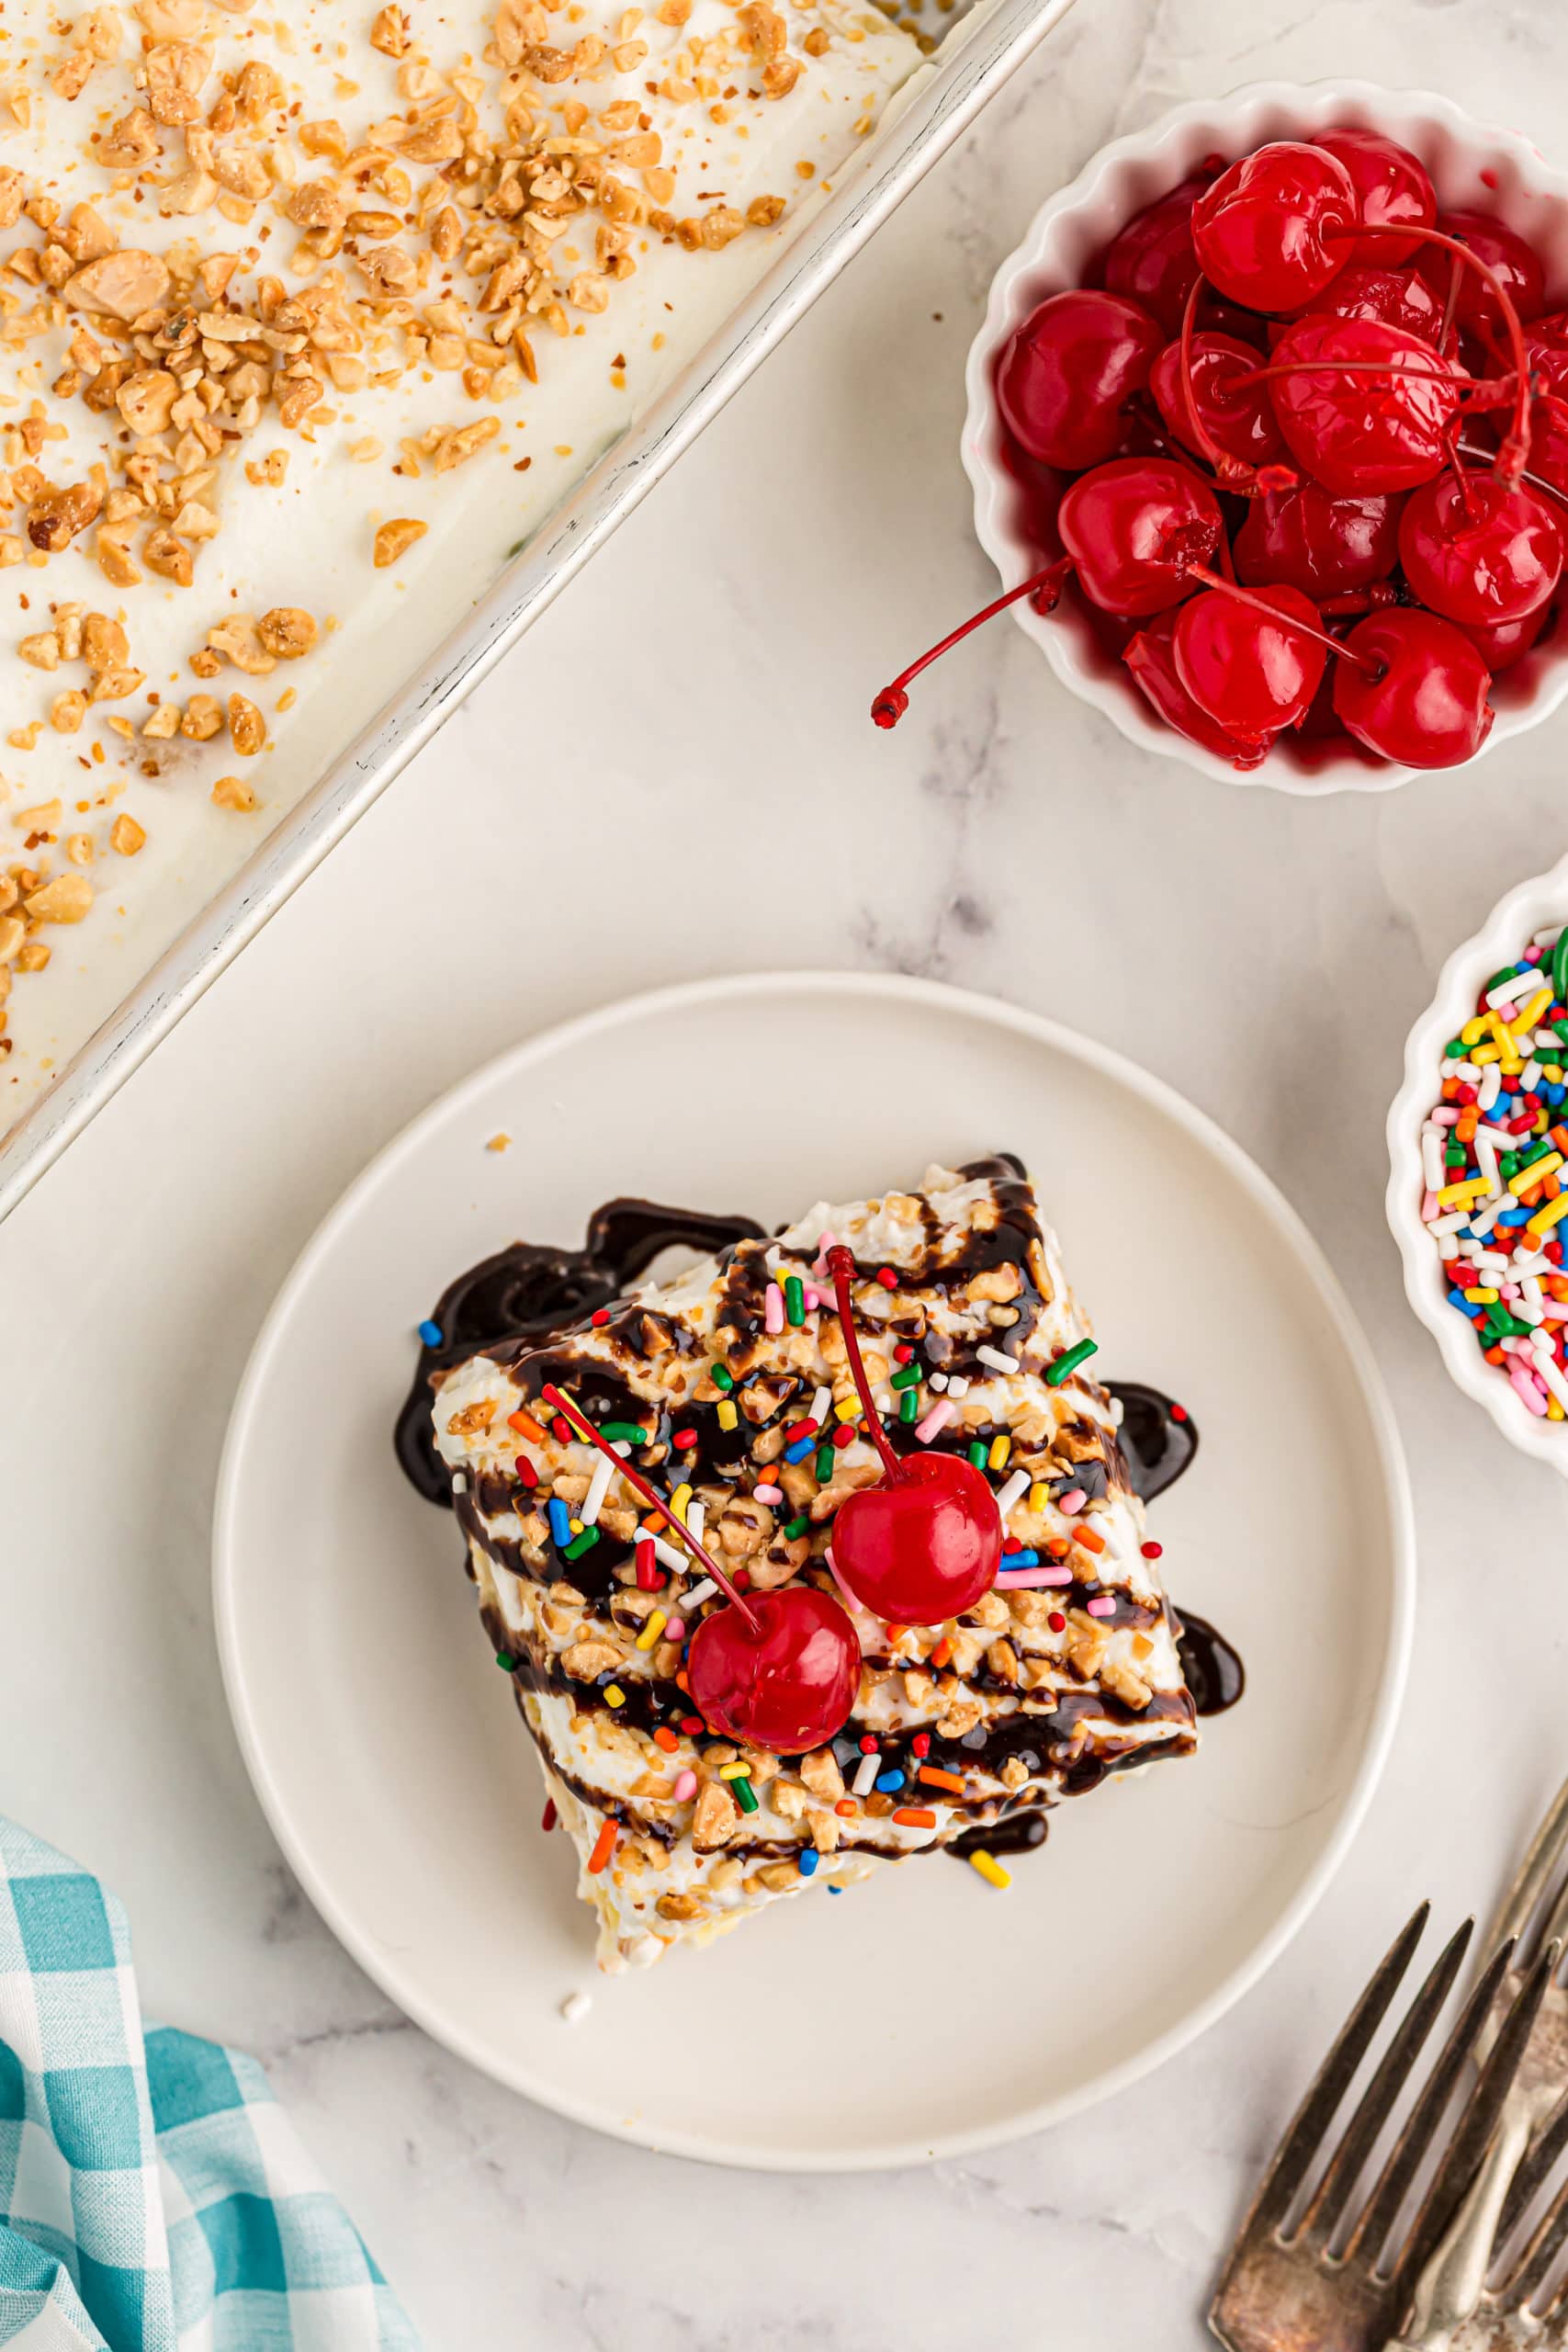 Overhead view of banana split cake on plate with bowls of cherries and sprinkles